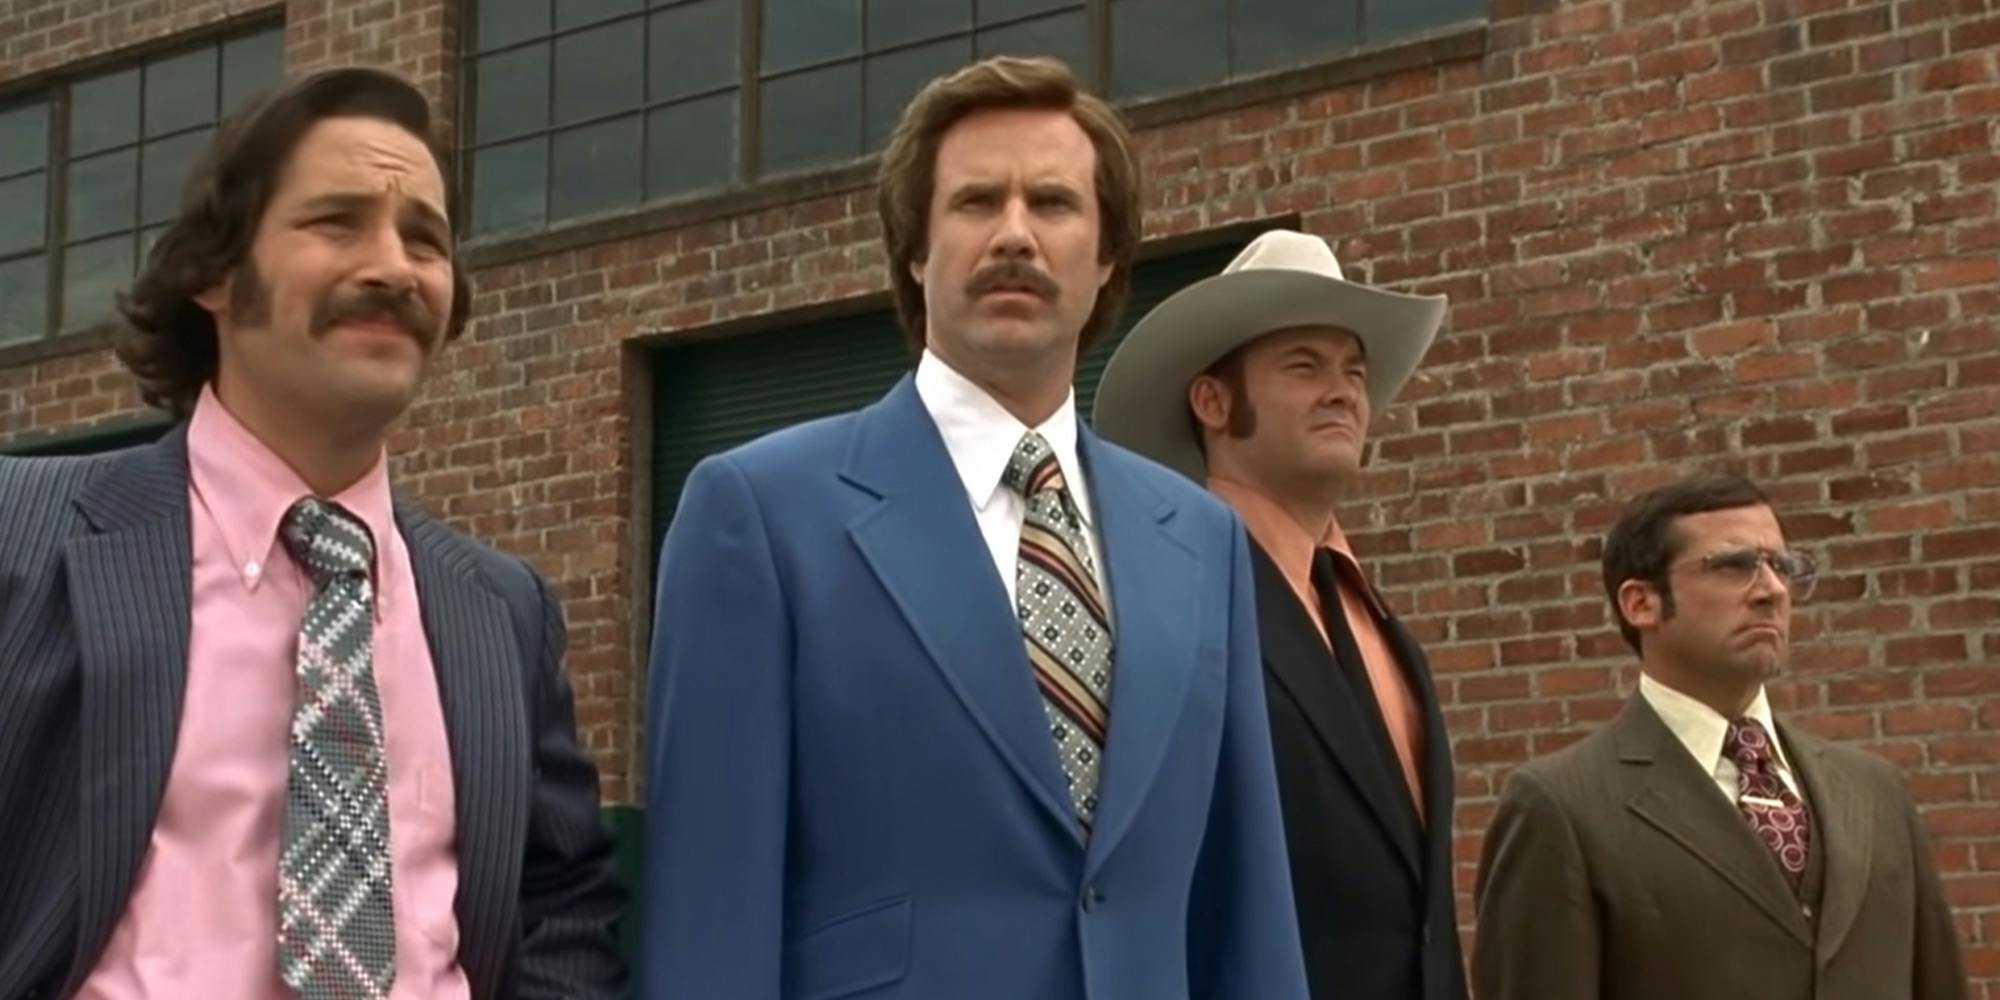 Anchorman crew to illustrate Anchorman memes story